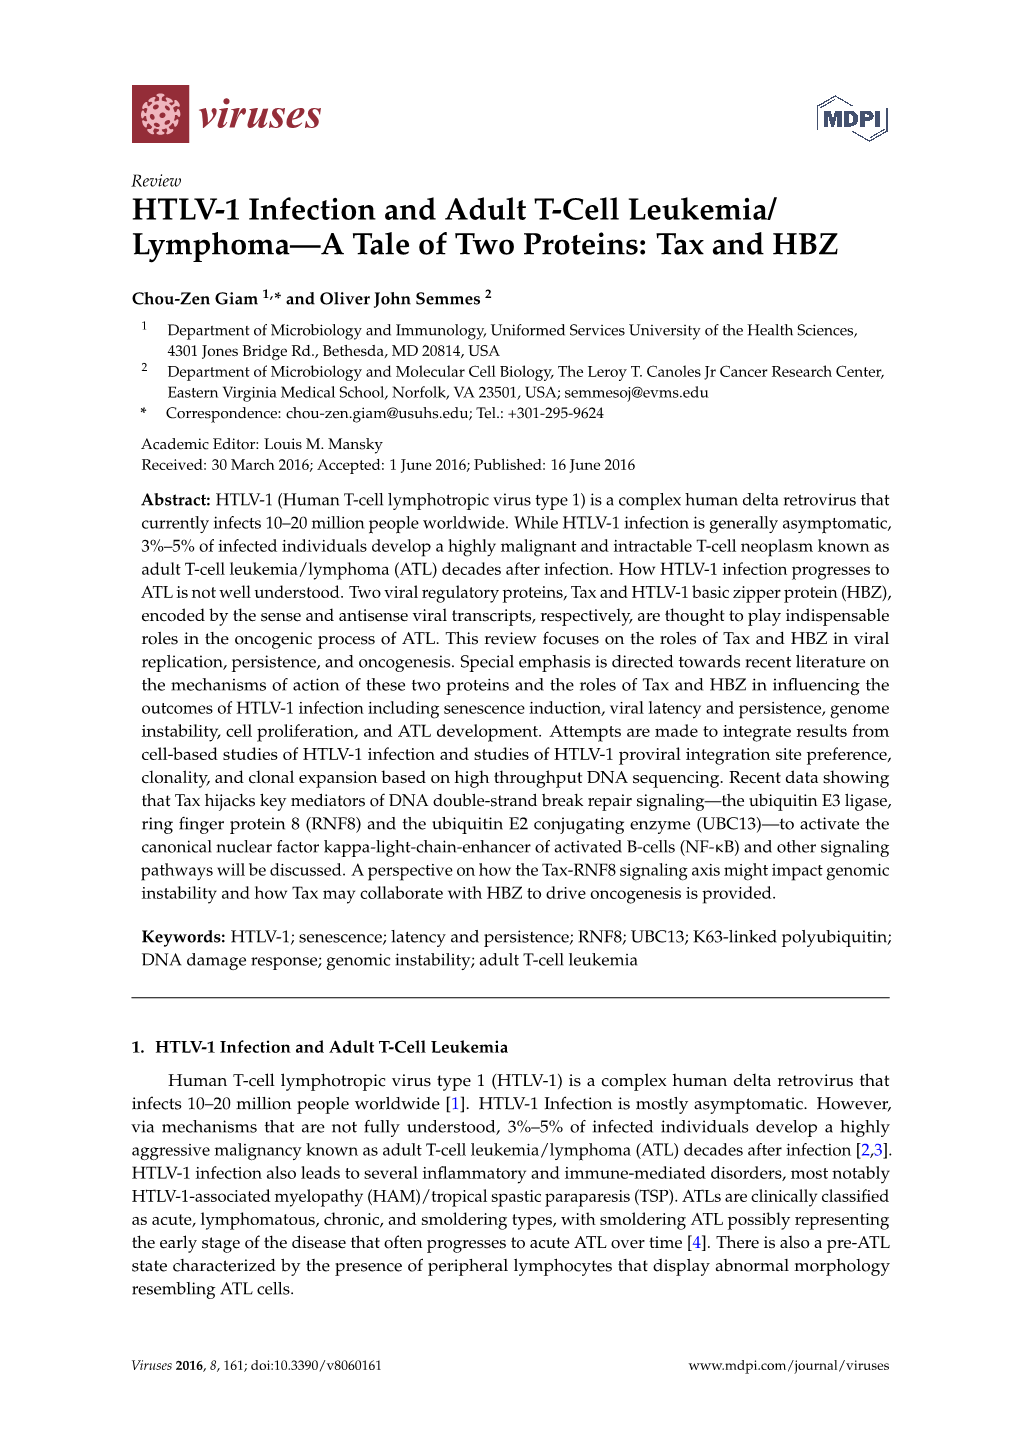 HTLV-1 Infection and Adult T-Cell Leukemia/ Lymphoma—A Tale of Two Proteins: Tax and HBZ